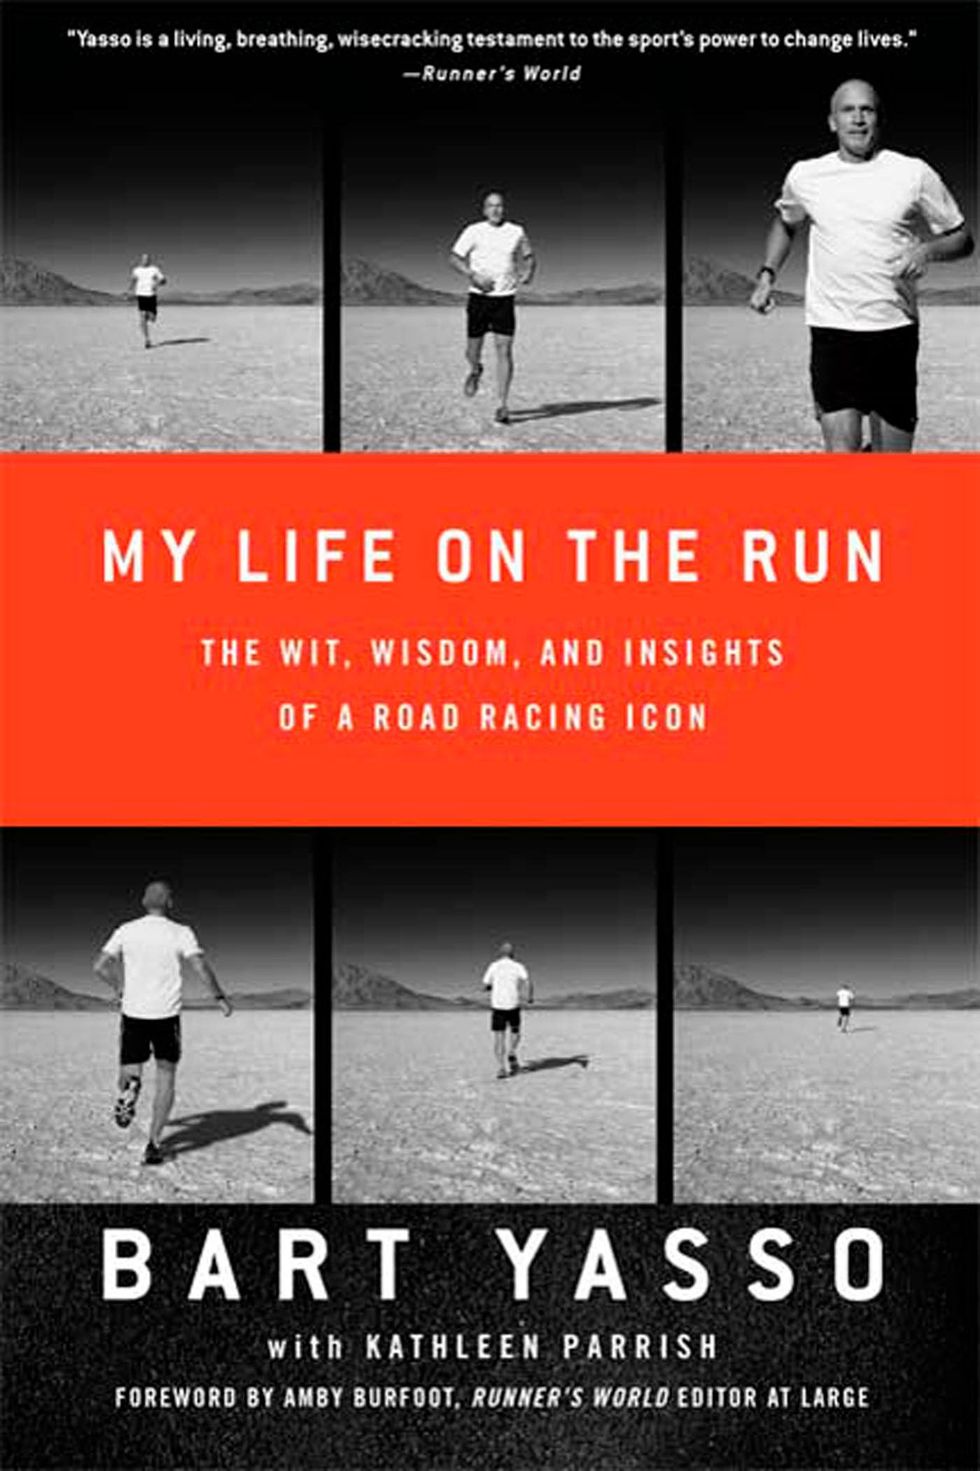 'My Life on the Run: The Wit, Wisdom, and Insights of a Road Racing Icon' by Bart Yasso